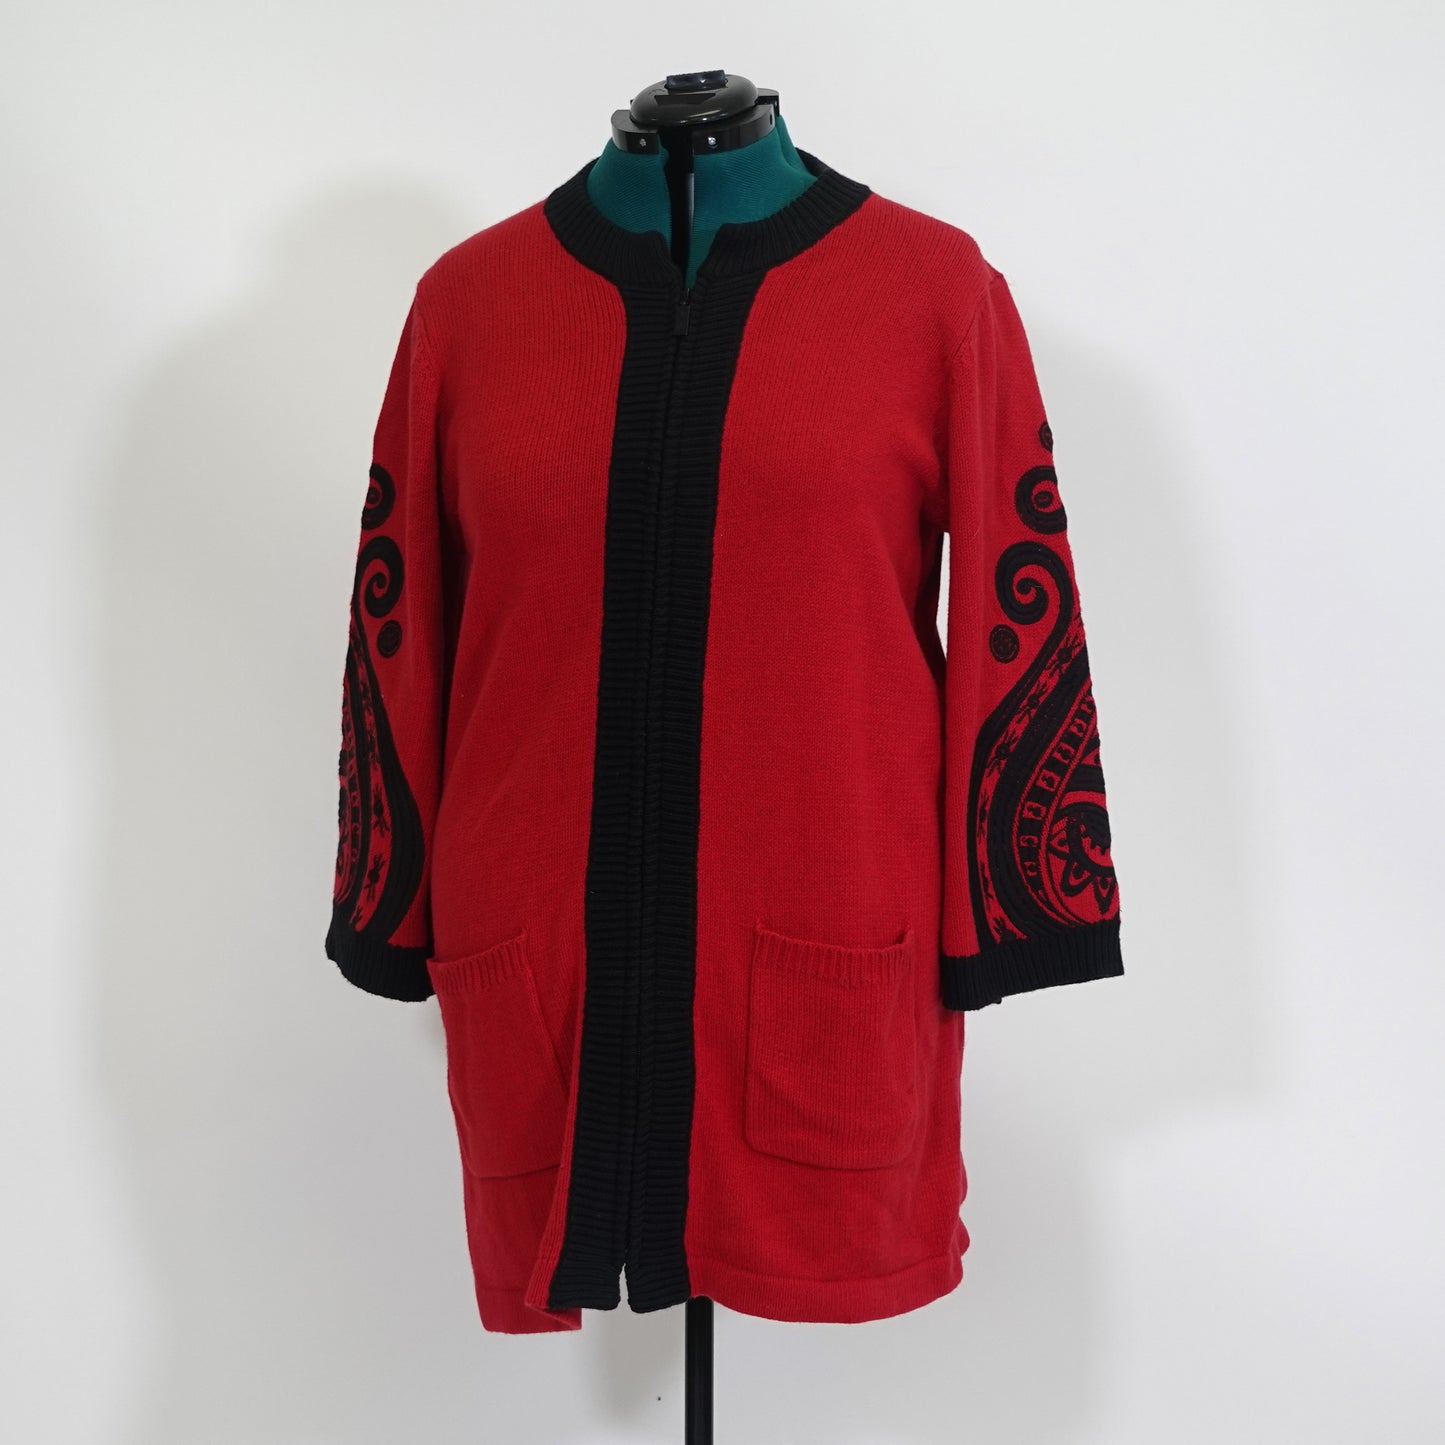 Bob Mackie Red and Black Zip Up Sweater